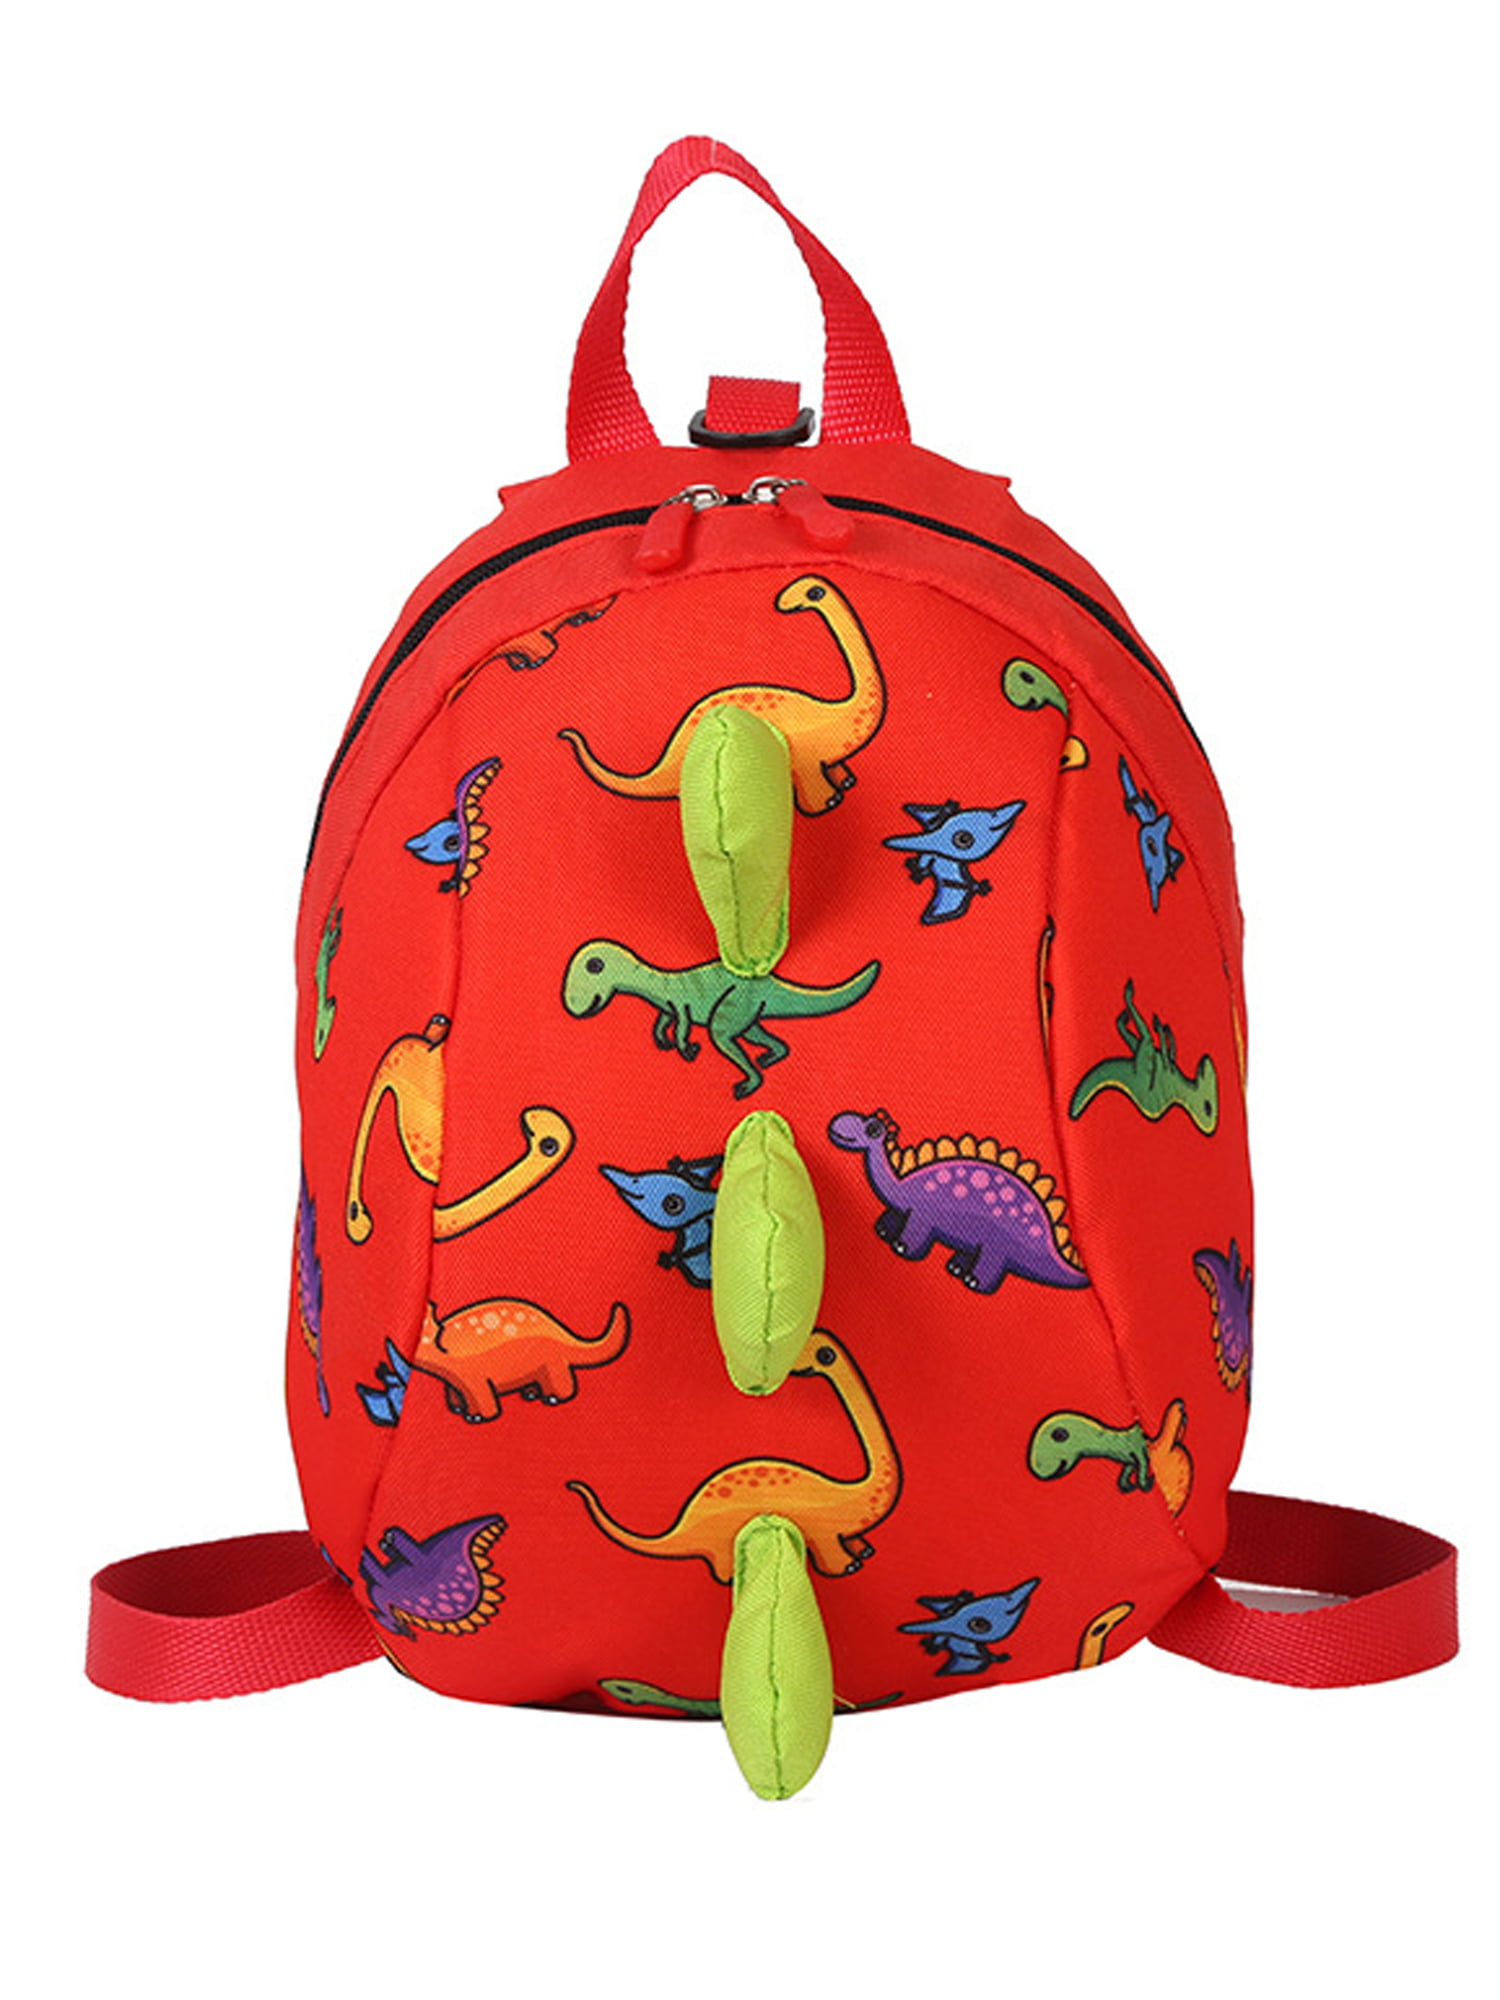 Baby Safety Walk Keeper Cartoon Shark Backpack Rucksack with Safety Harness 